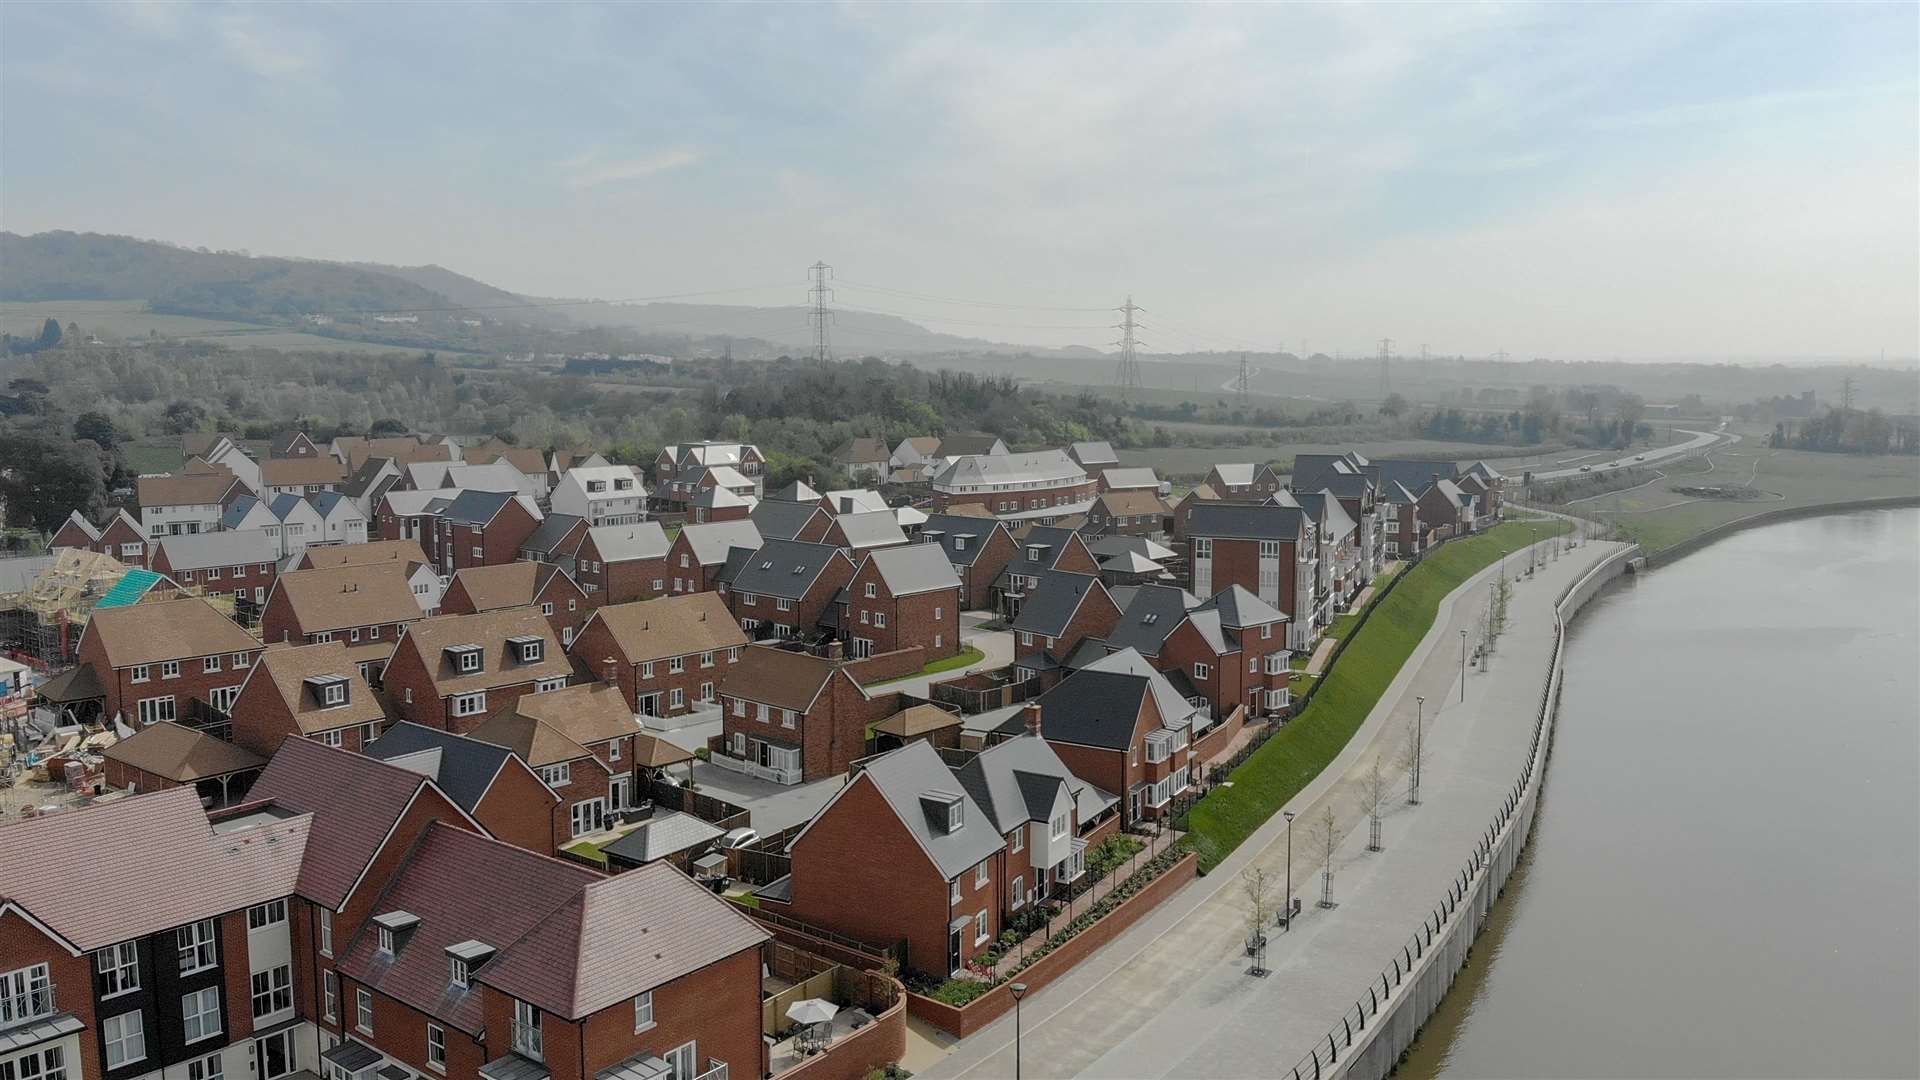 The Peters Village development near Rochester and Maidstone has 1,000 homes